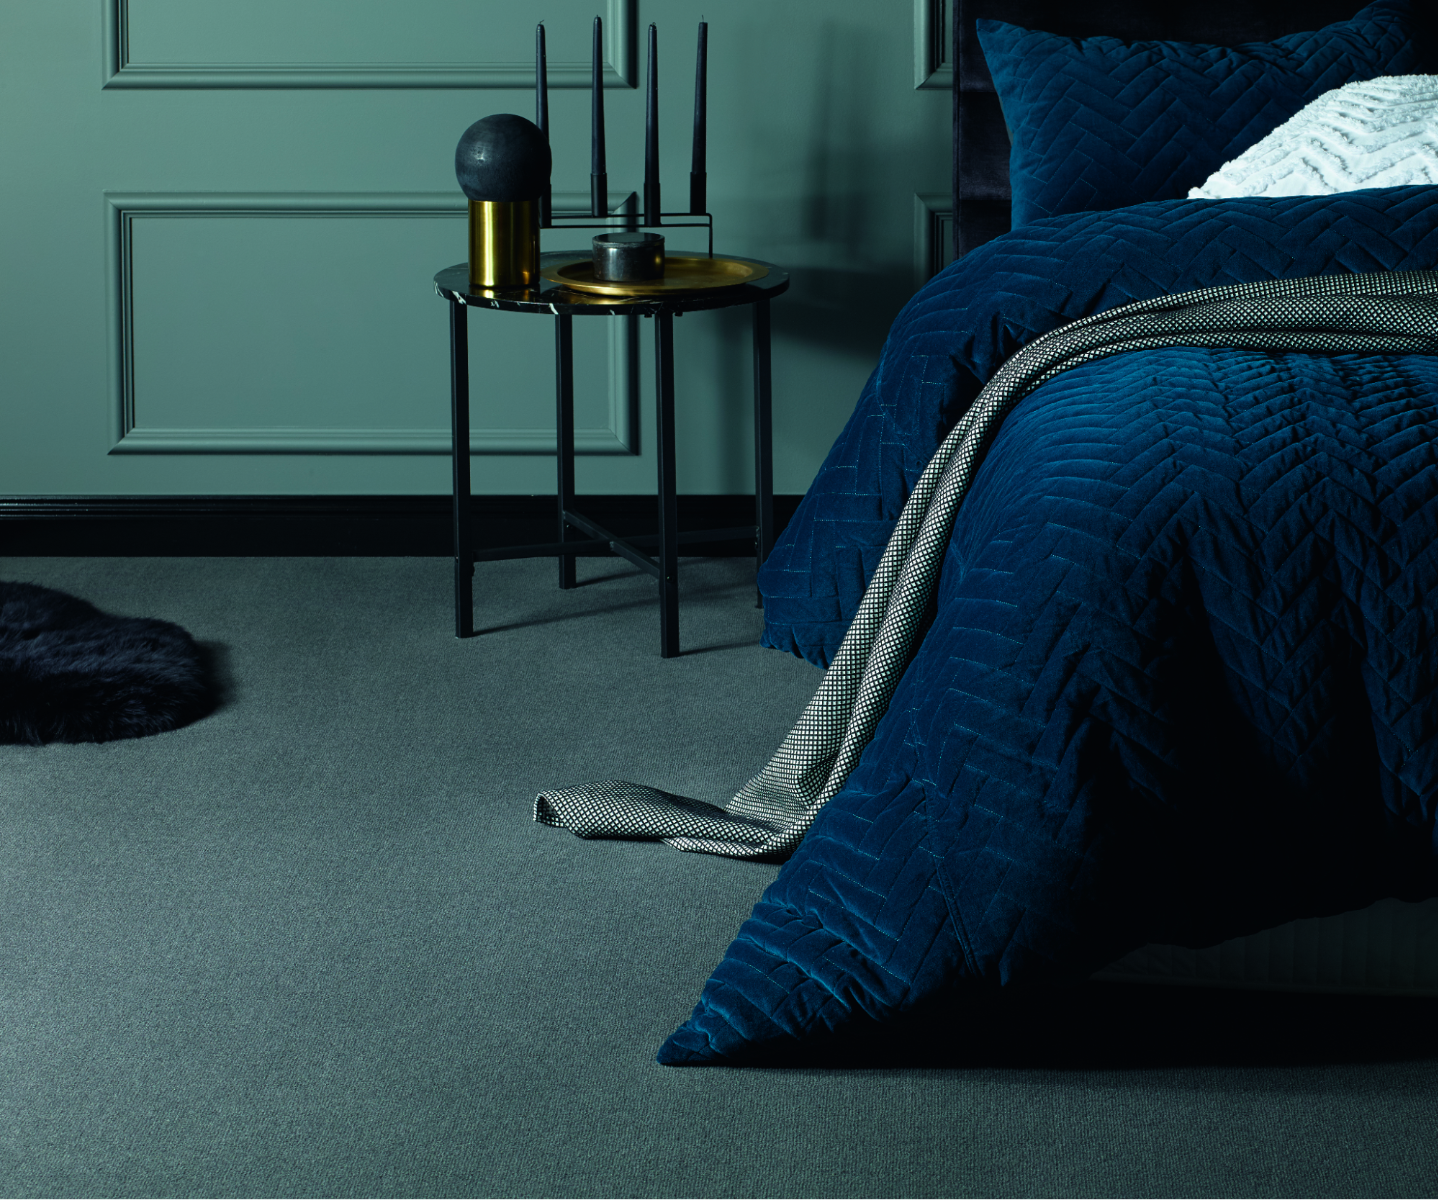 Bed with blue comforter/quilt on greyish green wool carpet